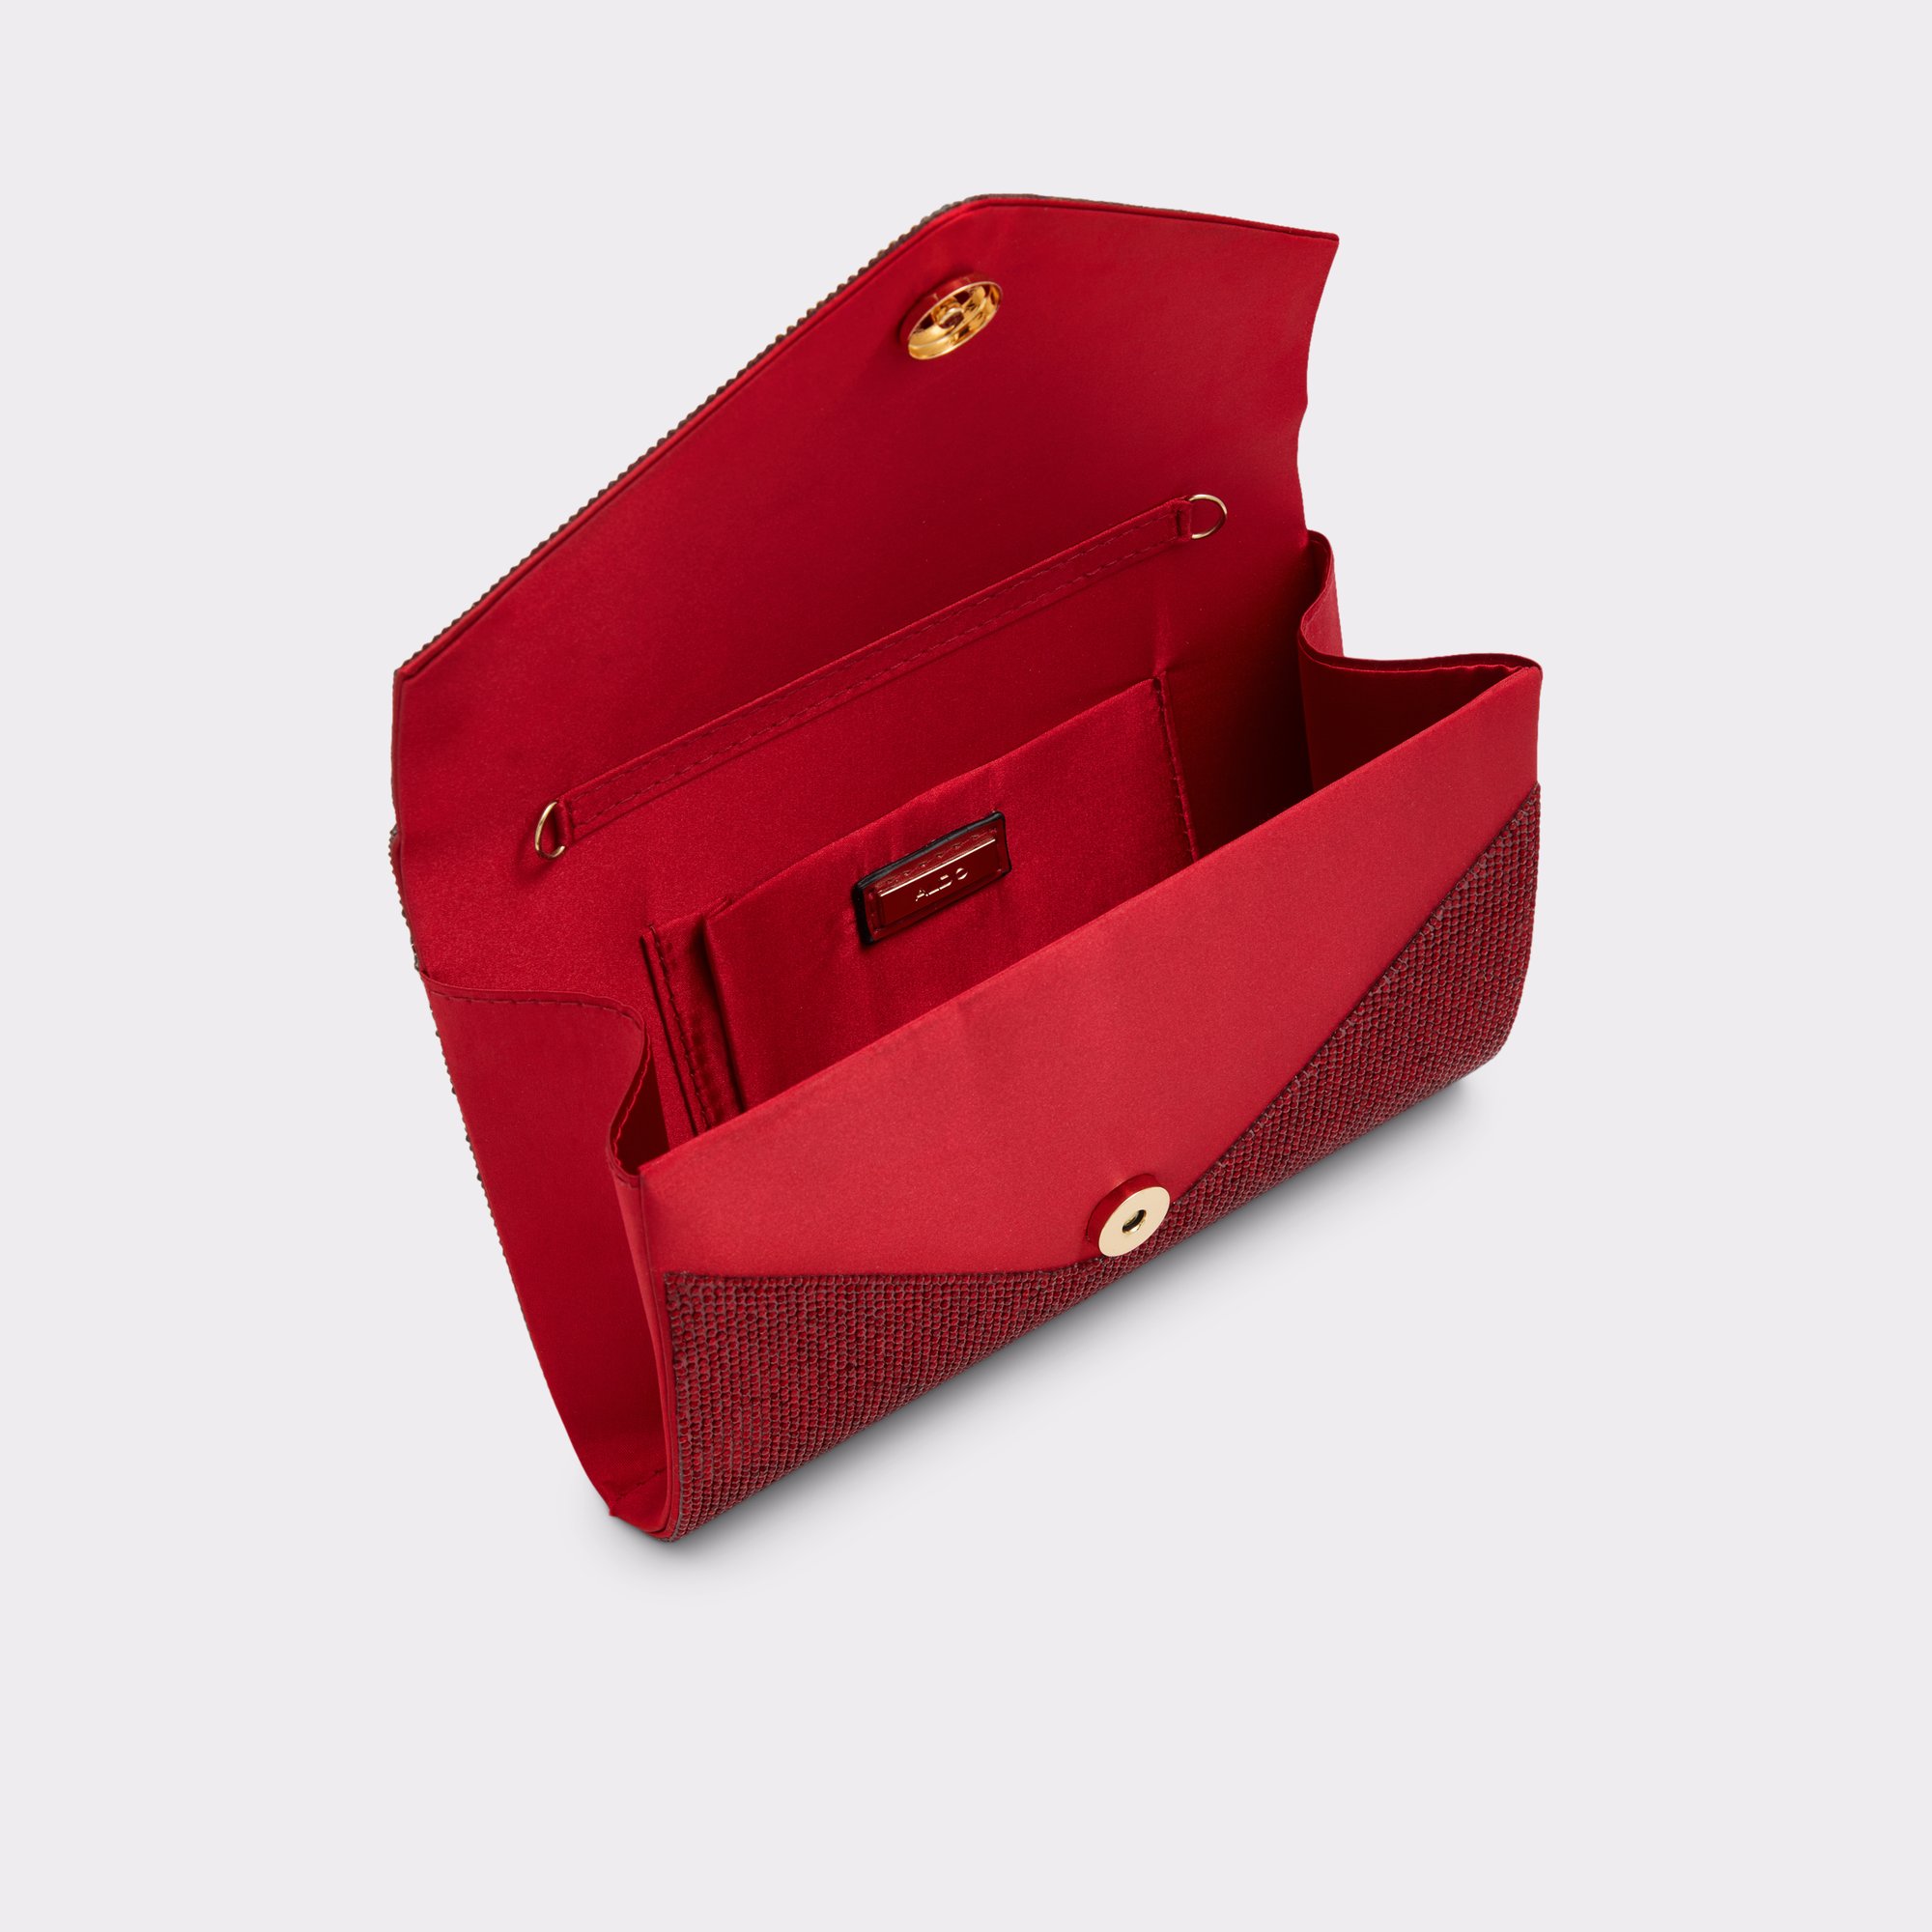 Geaven Other Red Women's Clutches & Evening bags | ALDO Canada